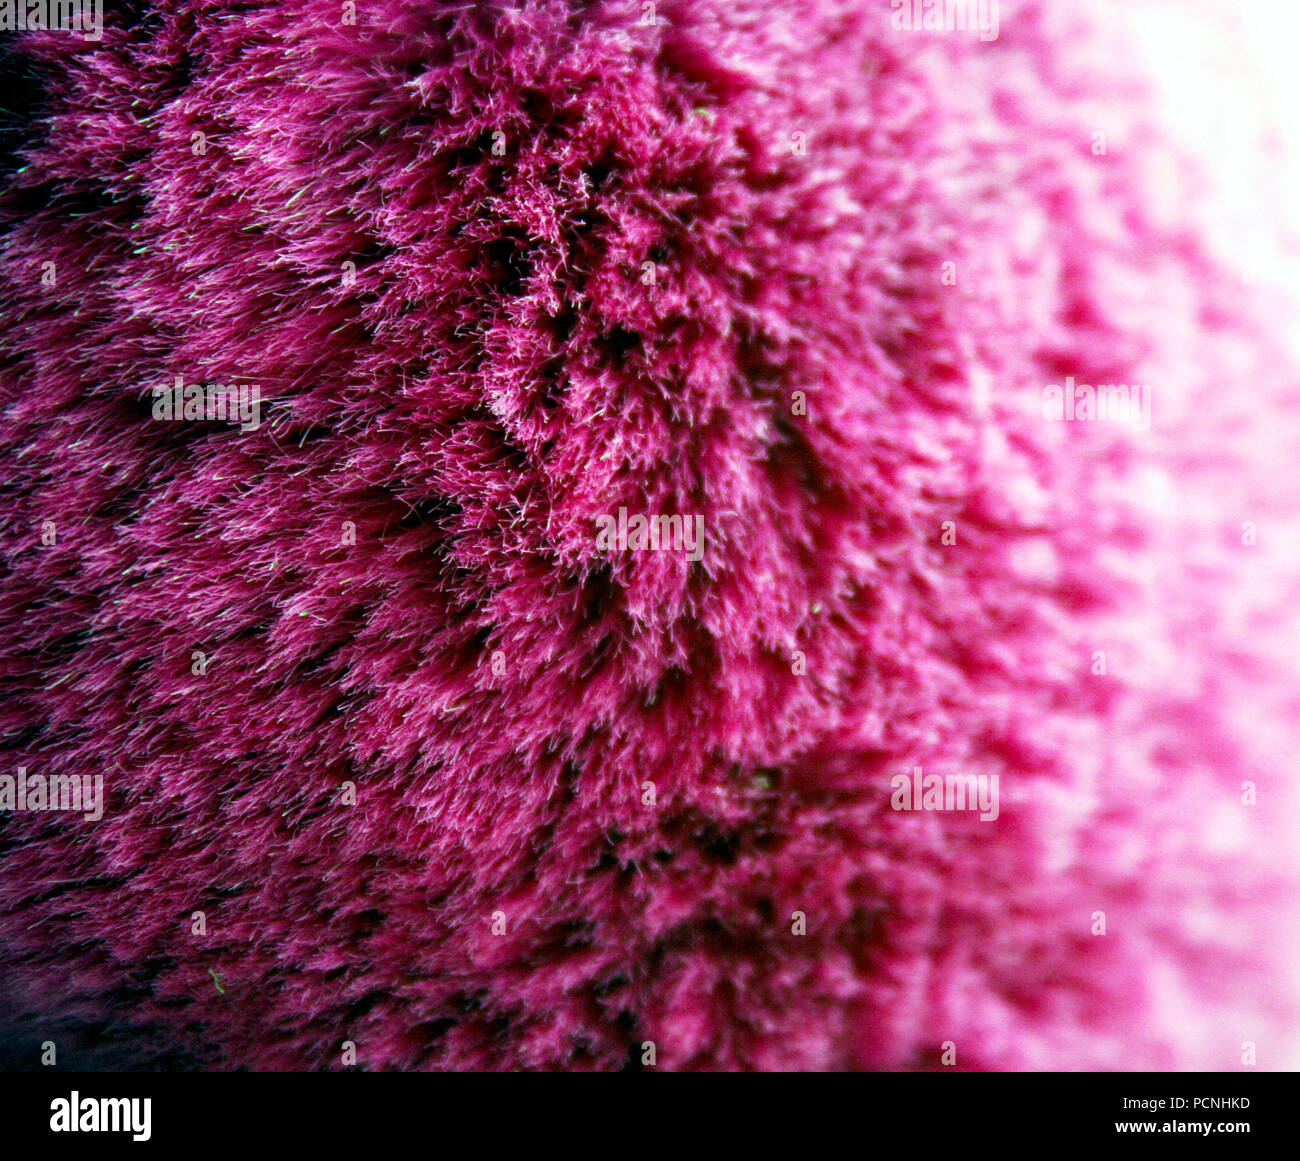 Pink color wool detail texture macro zoom Stock Photo